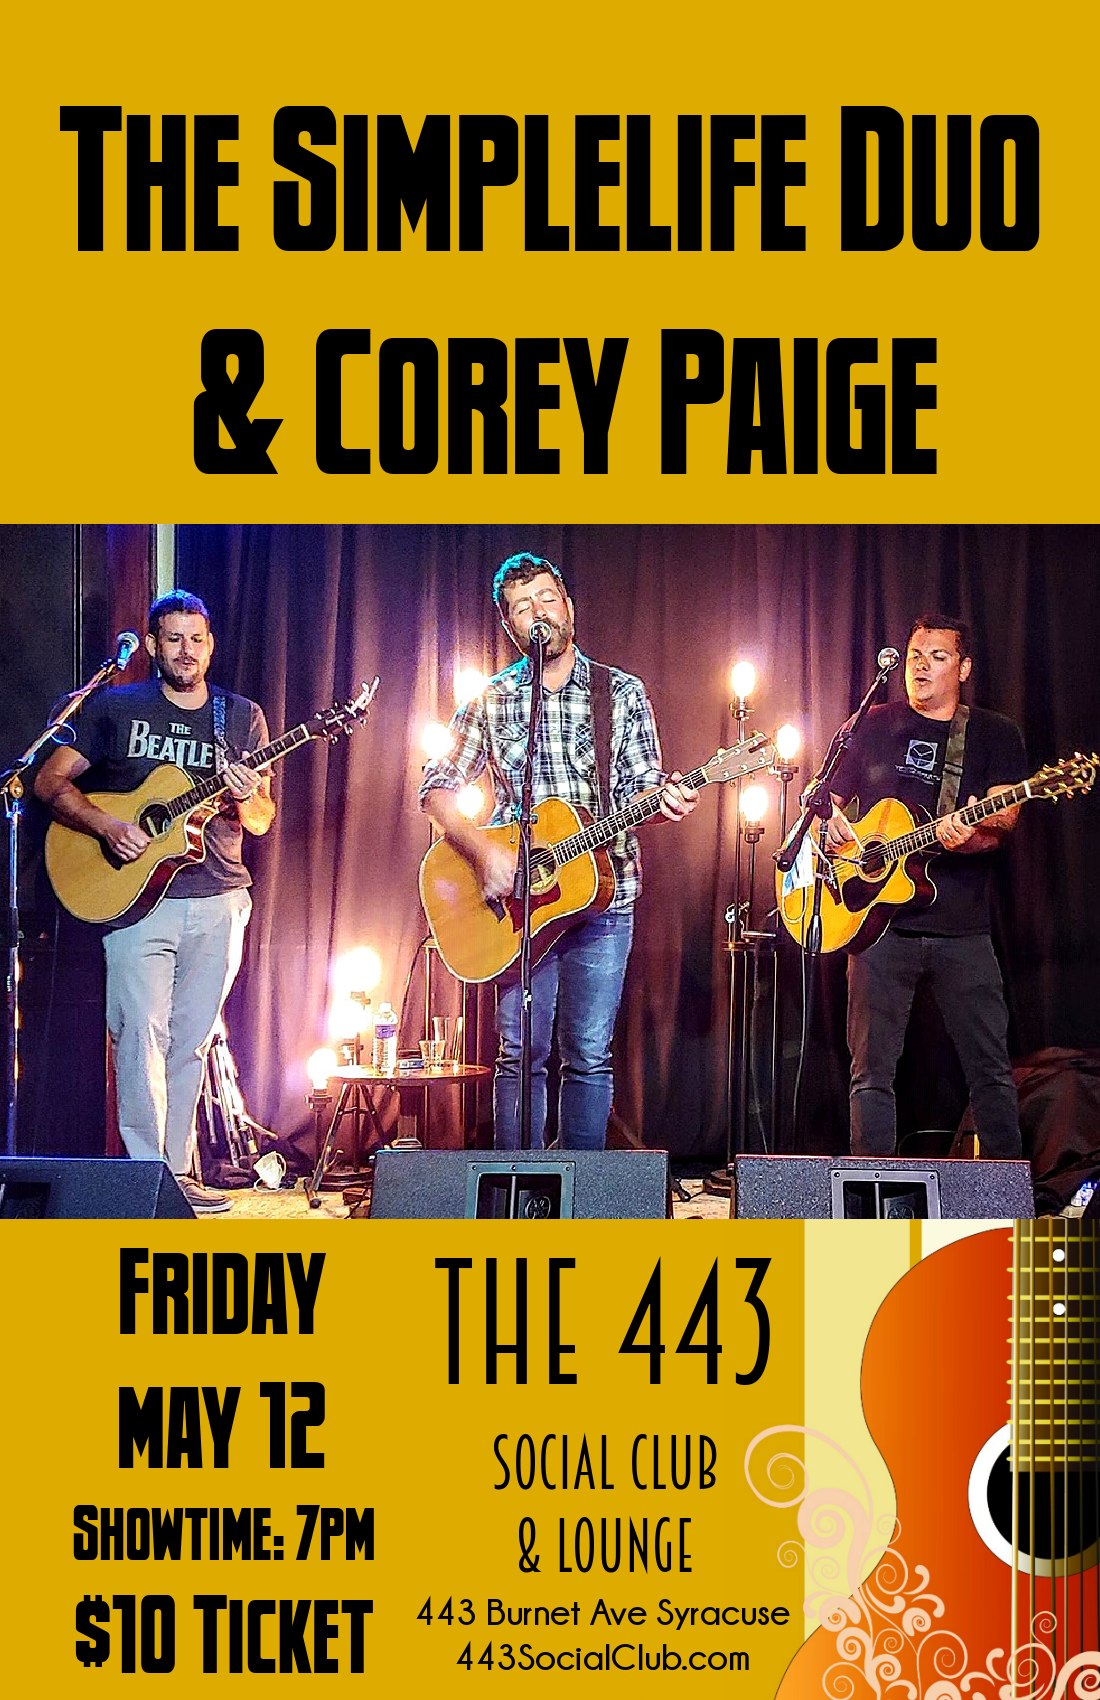 Simplelife & Corey Paige - 5/12 - The 443 Social Club & Lounge